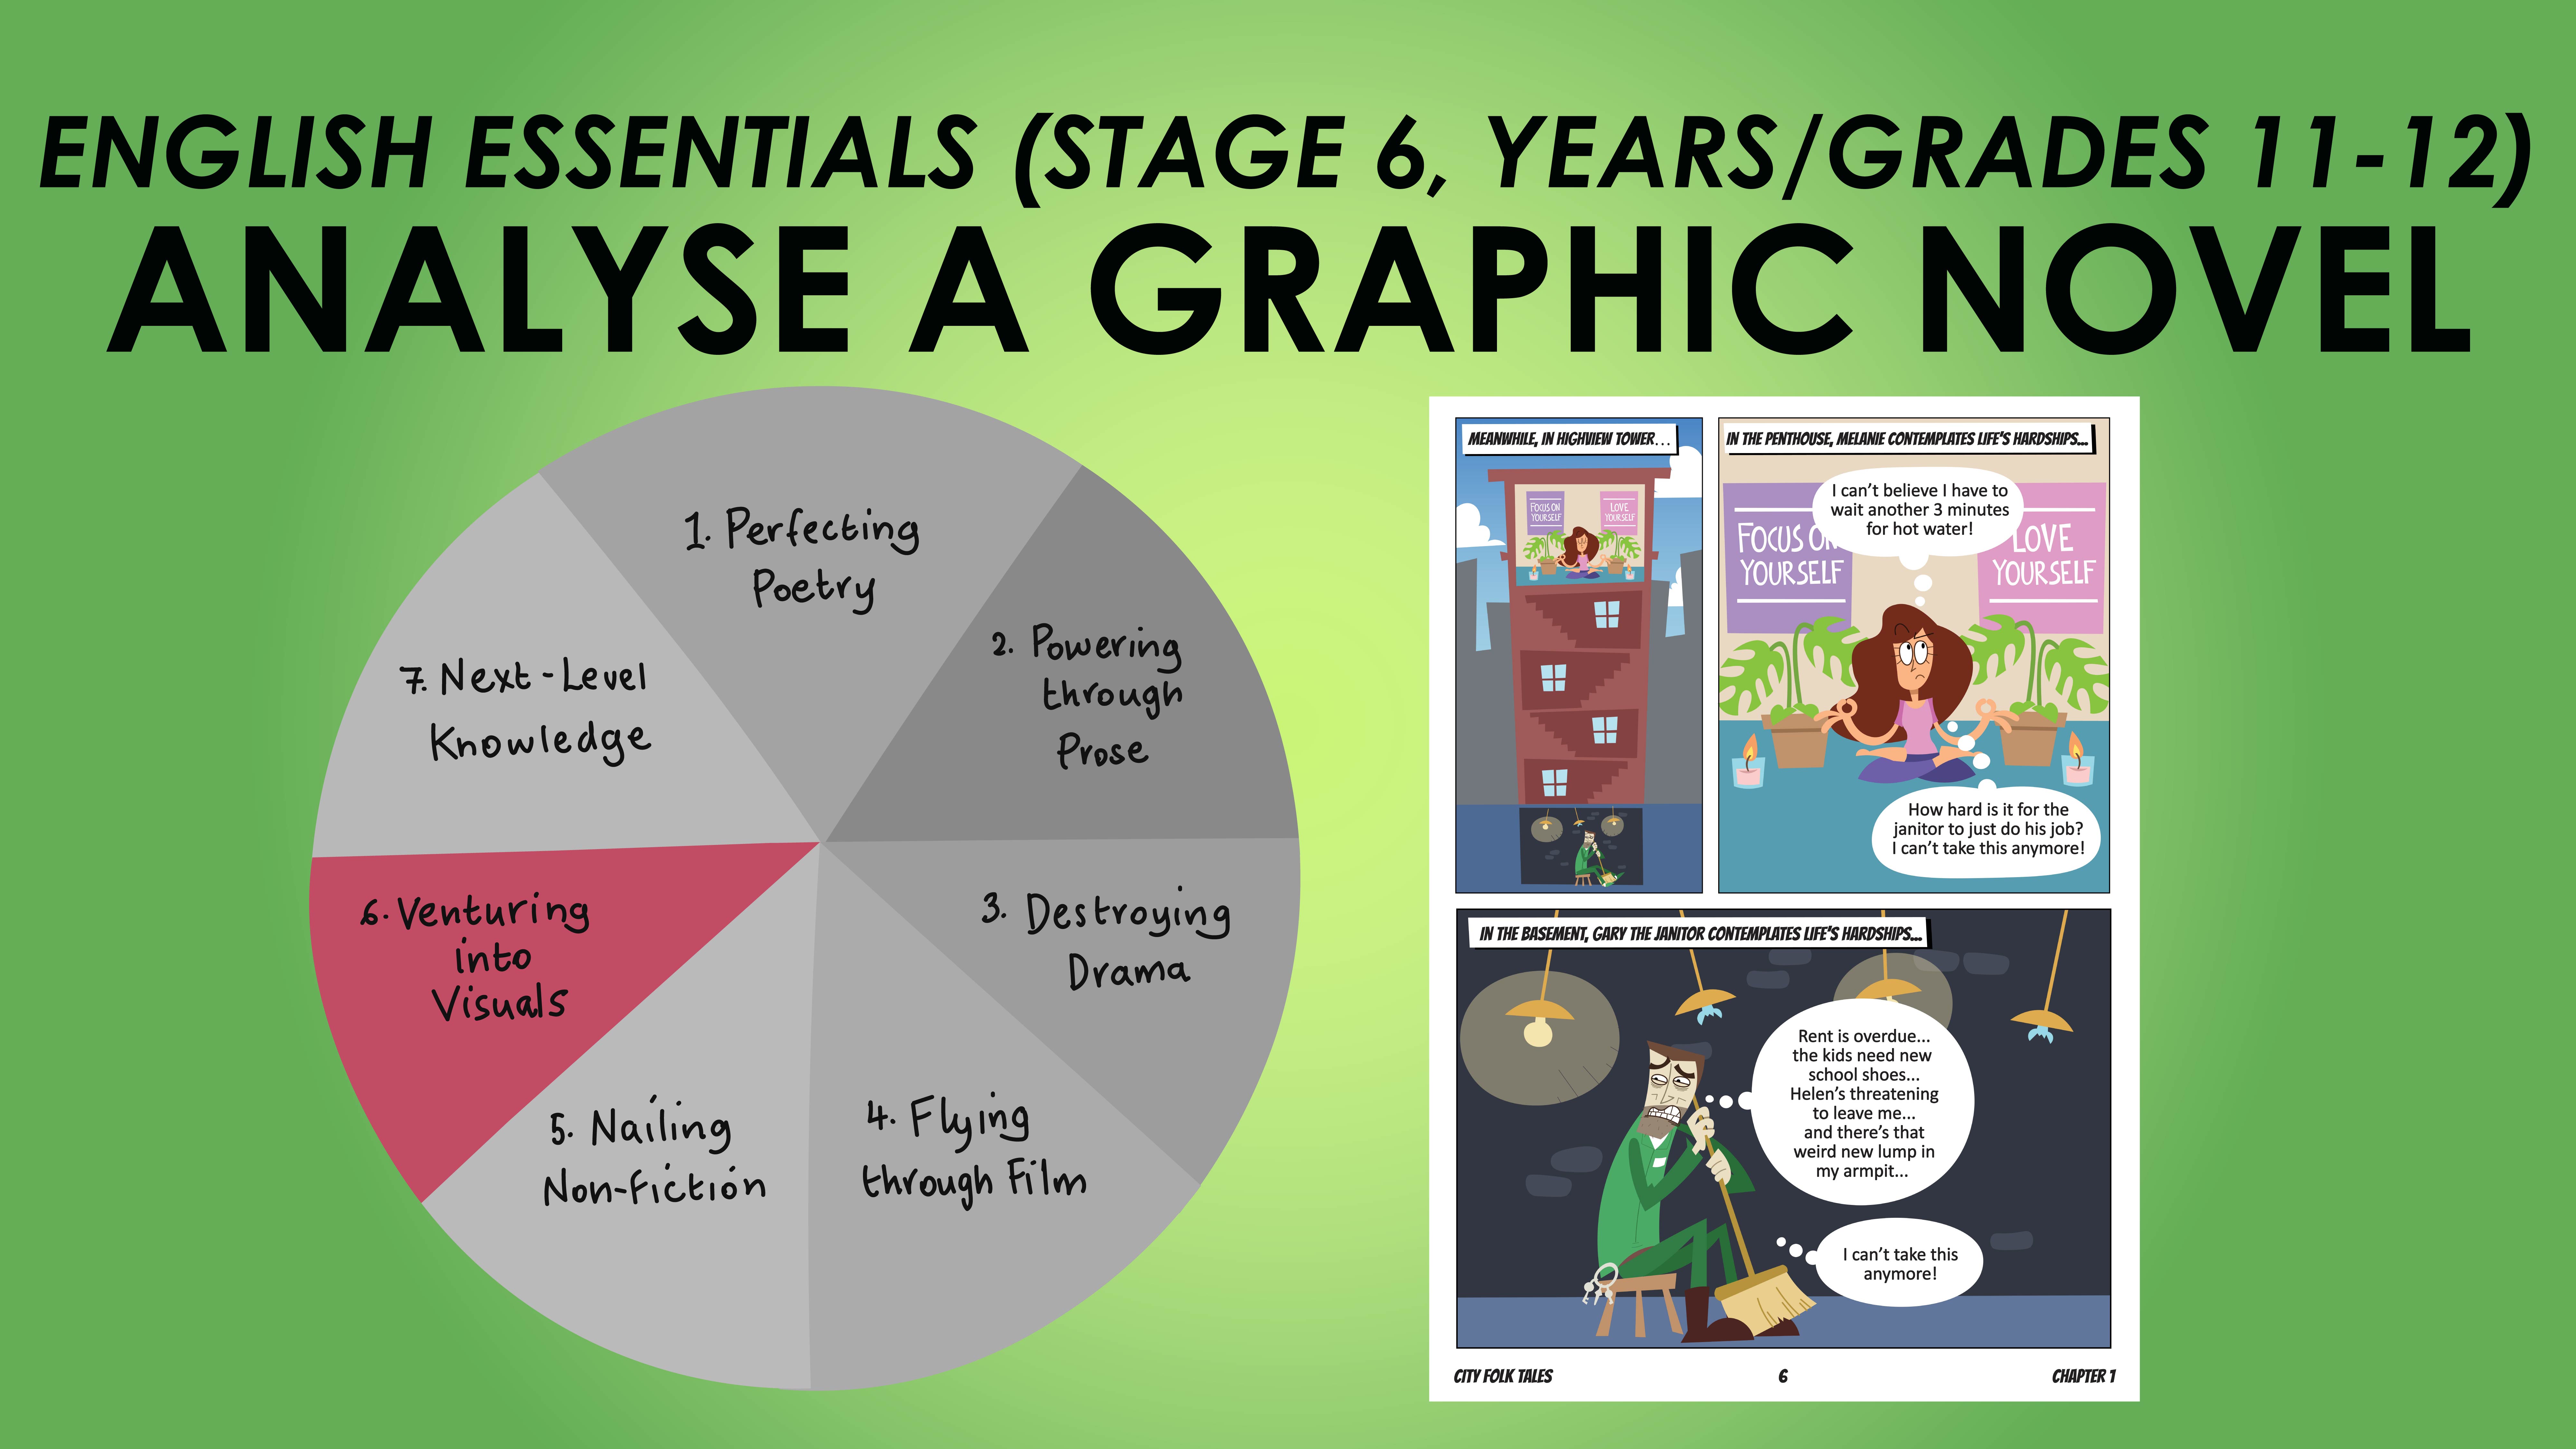 English Essentials - Venturing into Visuals - Analyse a Graphic Novel (Stage 6, Years/Grades 11-12) 